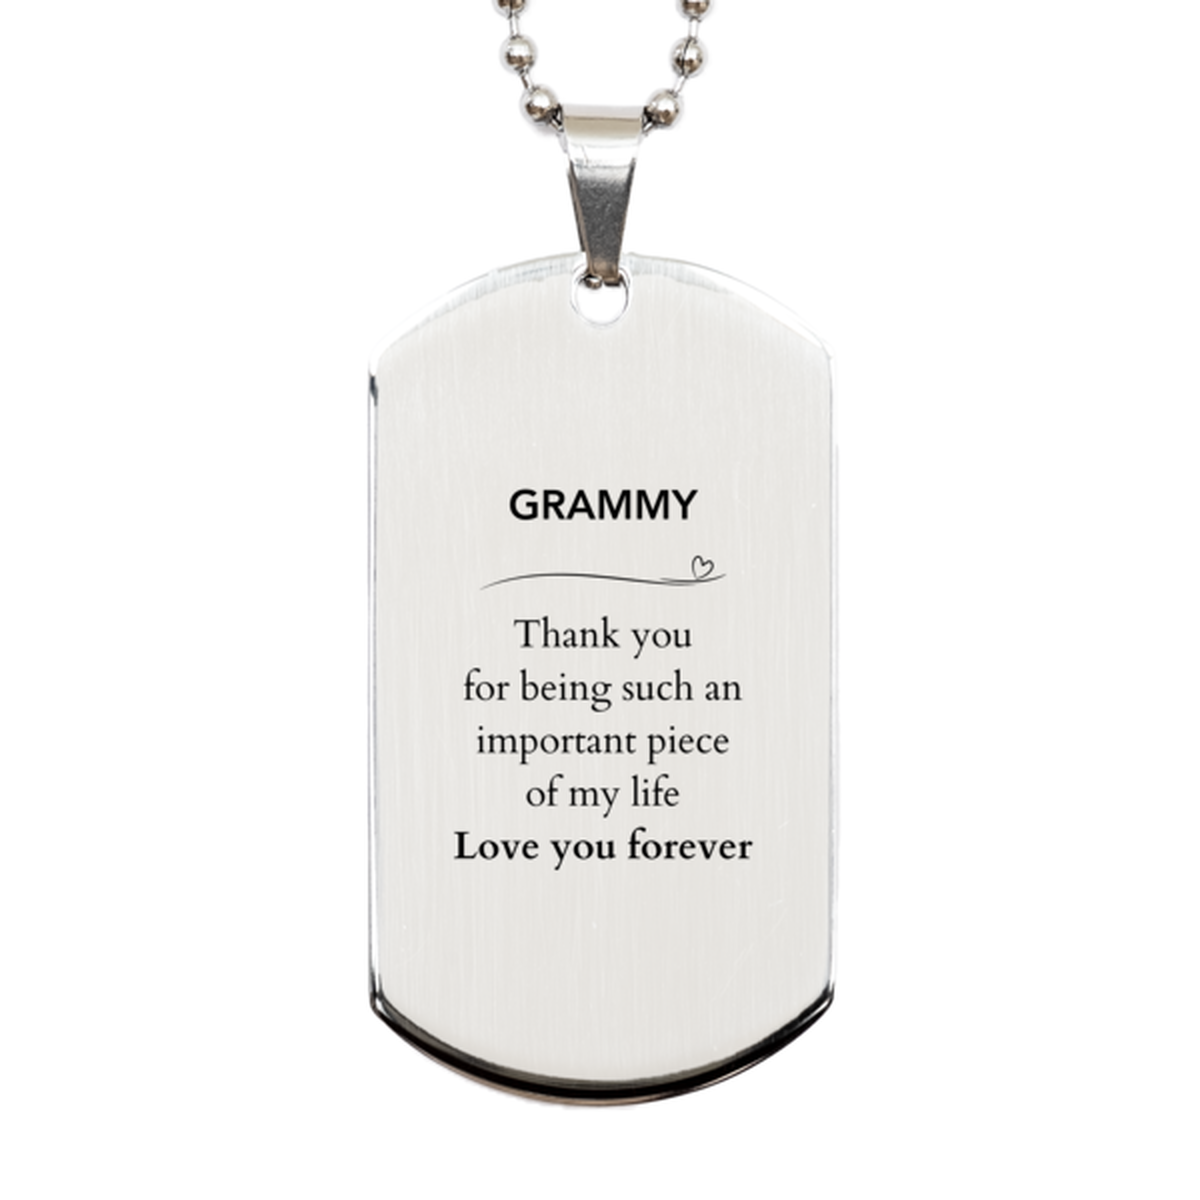 Appropriate Grammy Silver Dog Tag Epic Birthday Gifts for Grammy Thank you for being such an important piece of my life Grammy Christmas Mothers Fathers Day